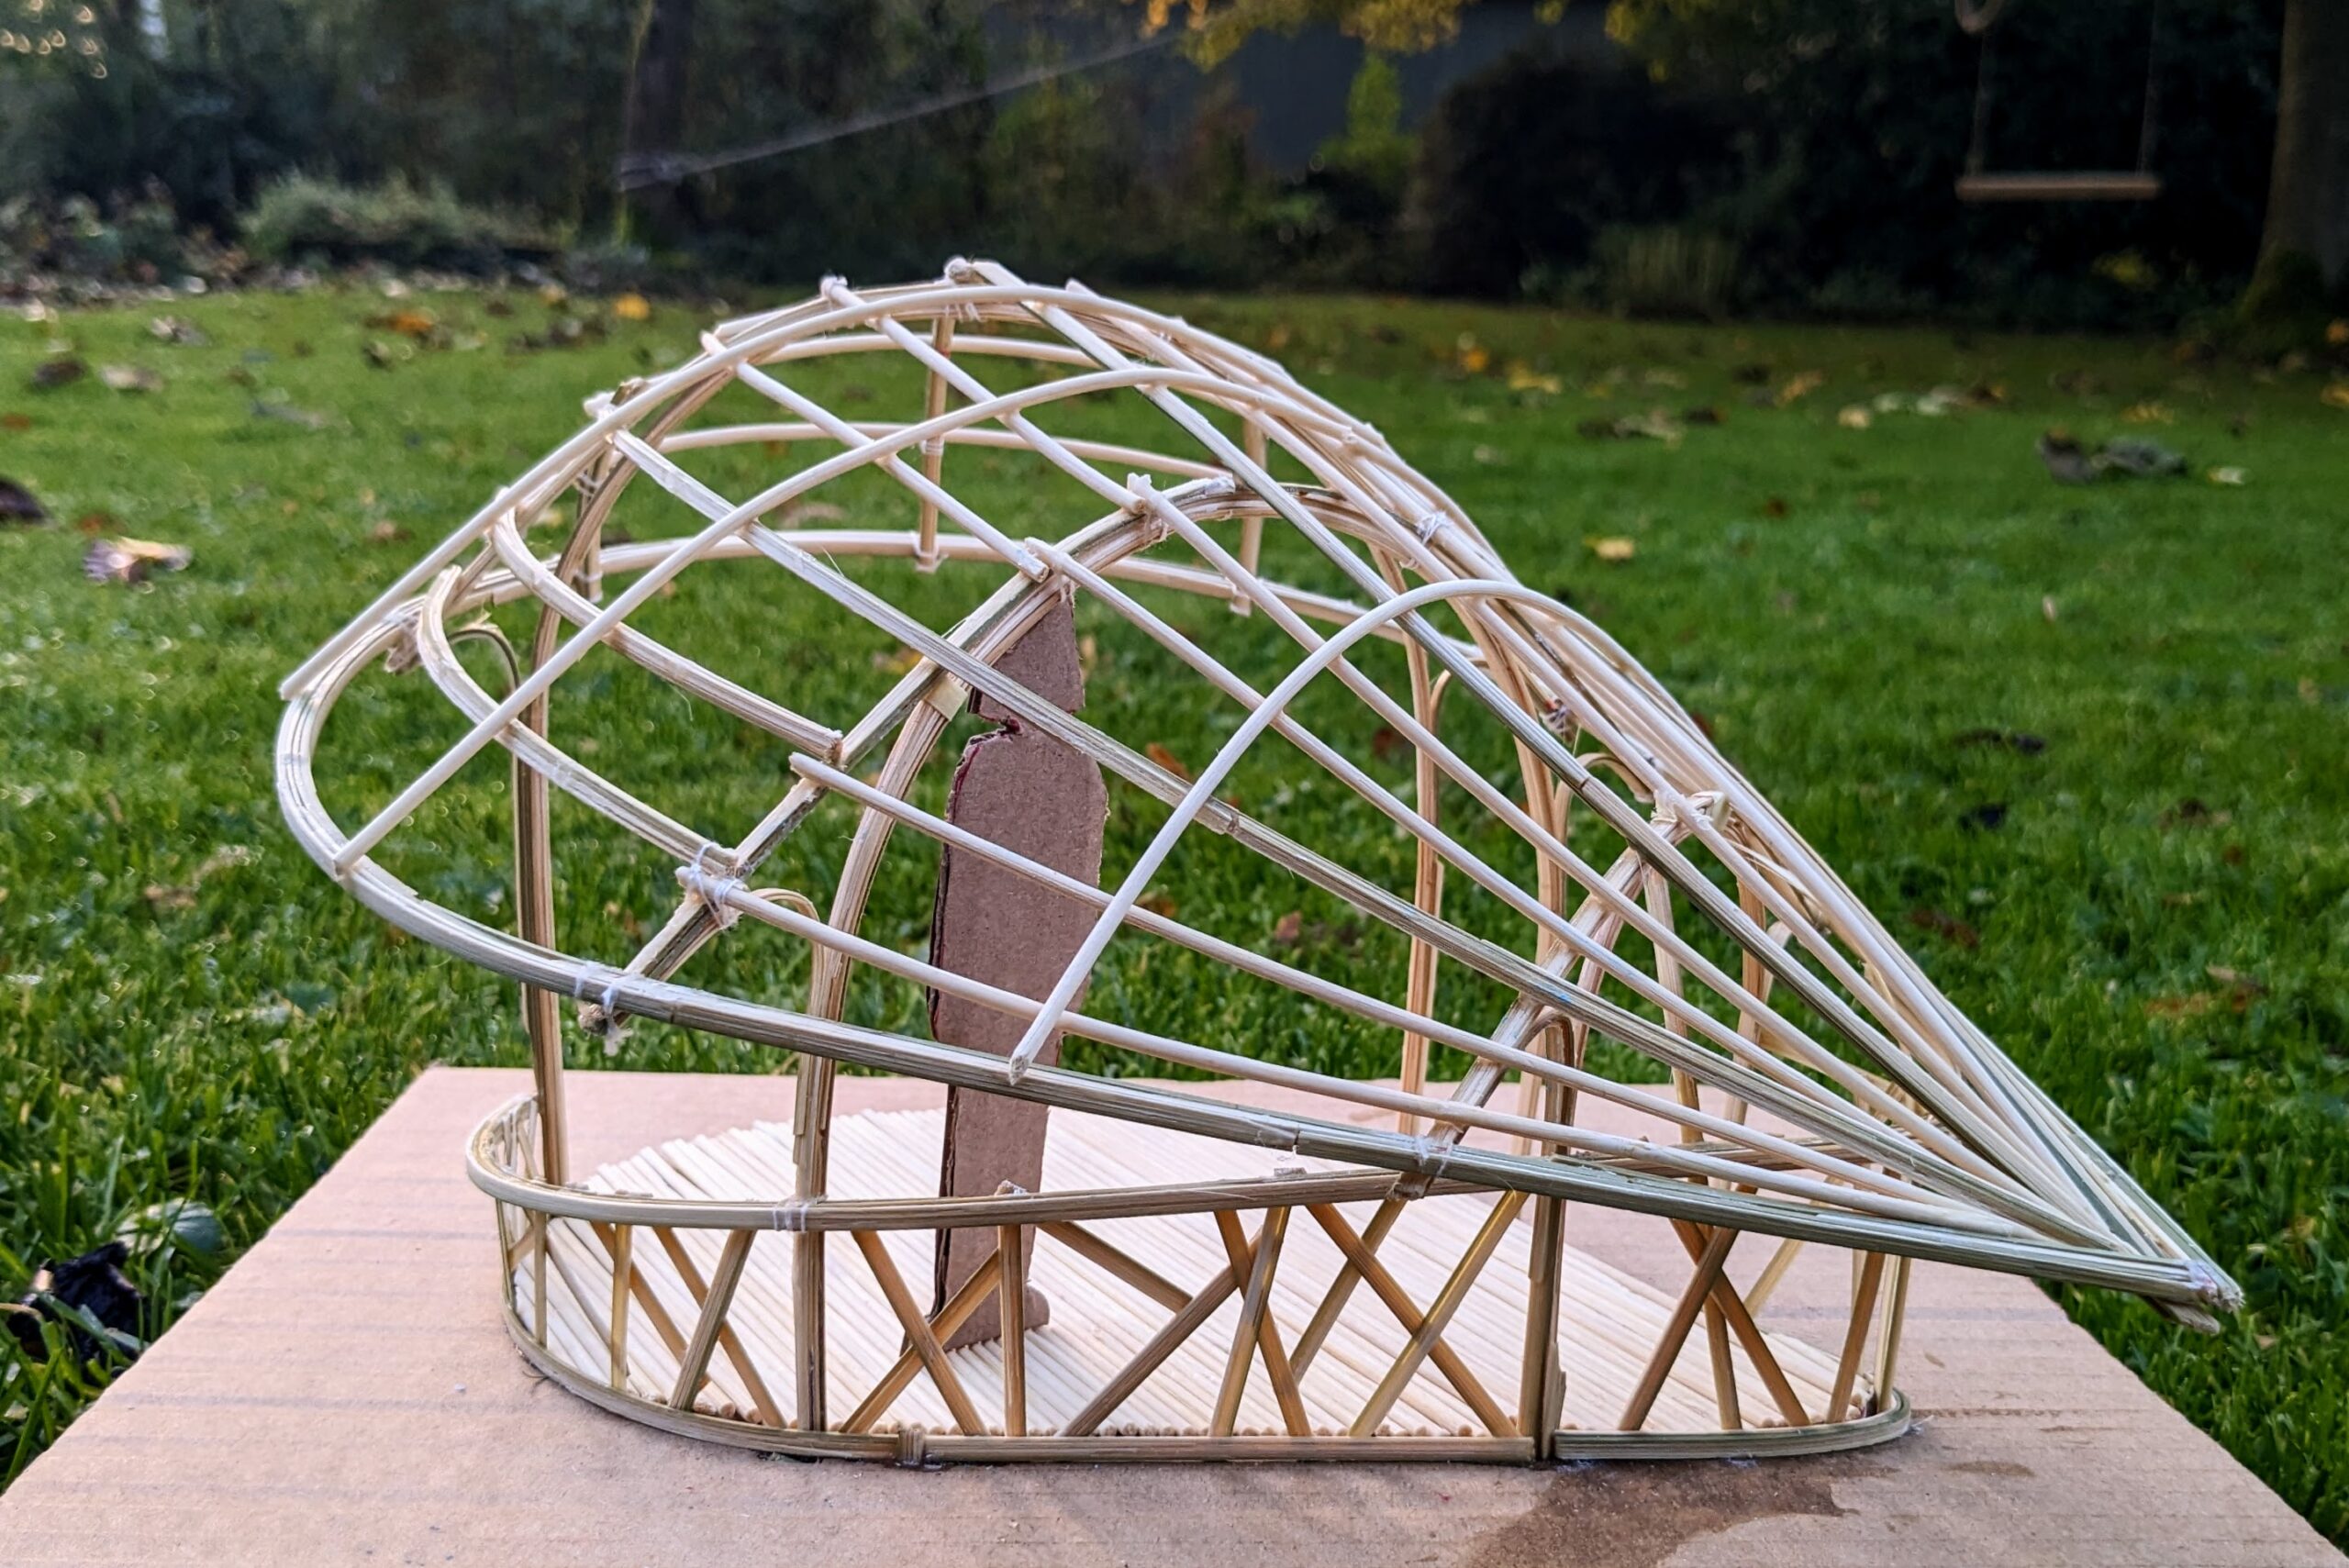 Bamboo U - Bamboo Pavilion Final Model by Hannah Filius during The Fundamentals of Building with Bamboo Online Course 